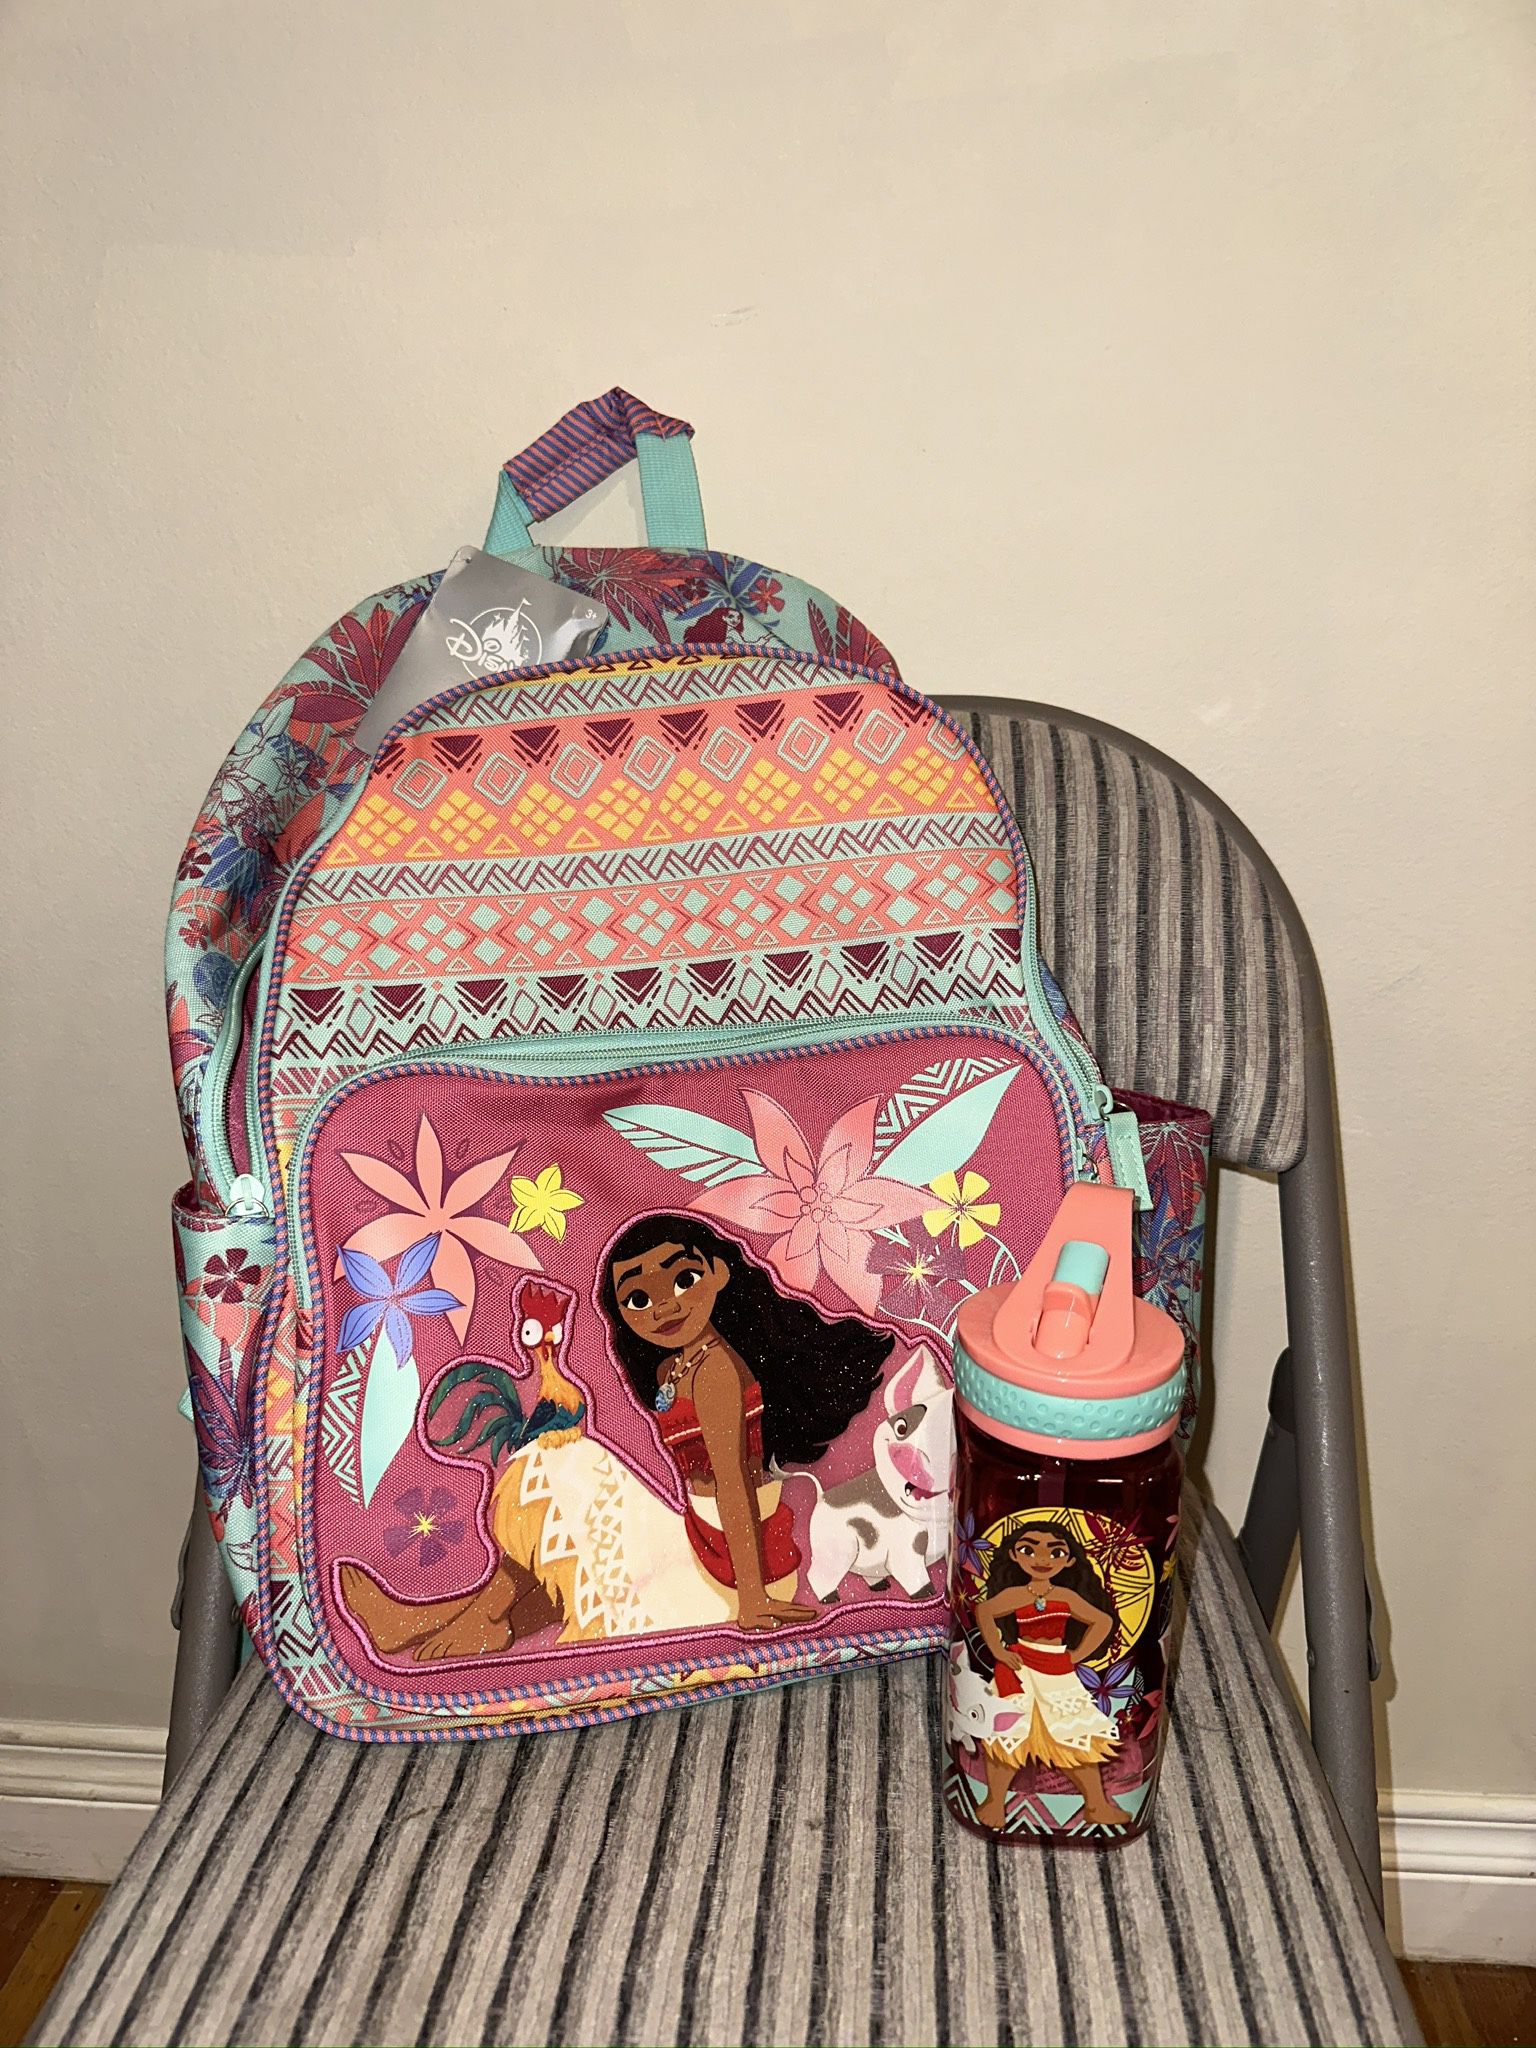 *BRAND NEW WITH TAGS* Disney Moana Backpack & Disney Moana Water Bottle